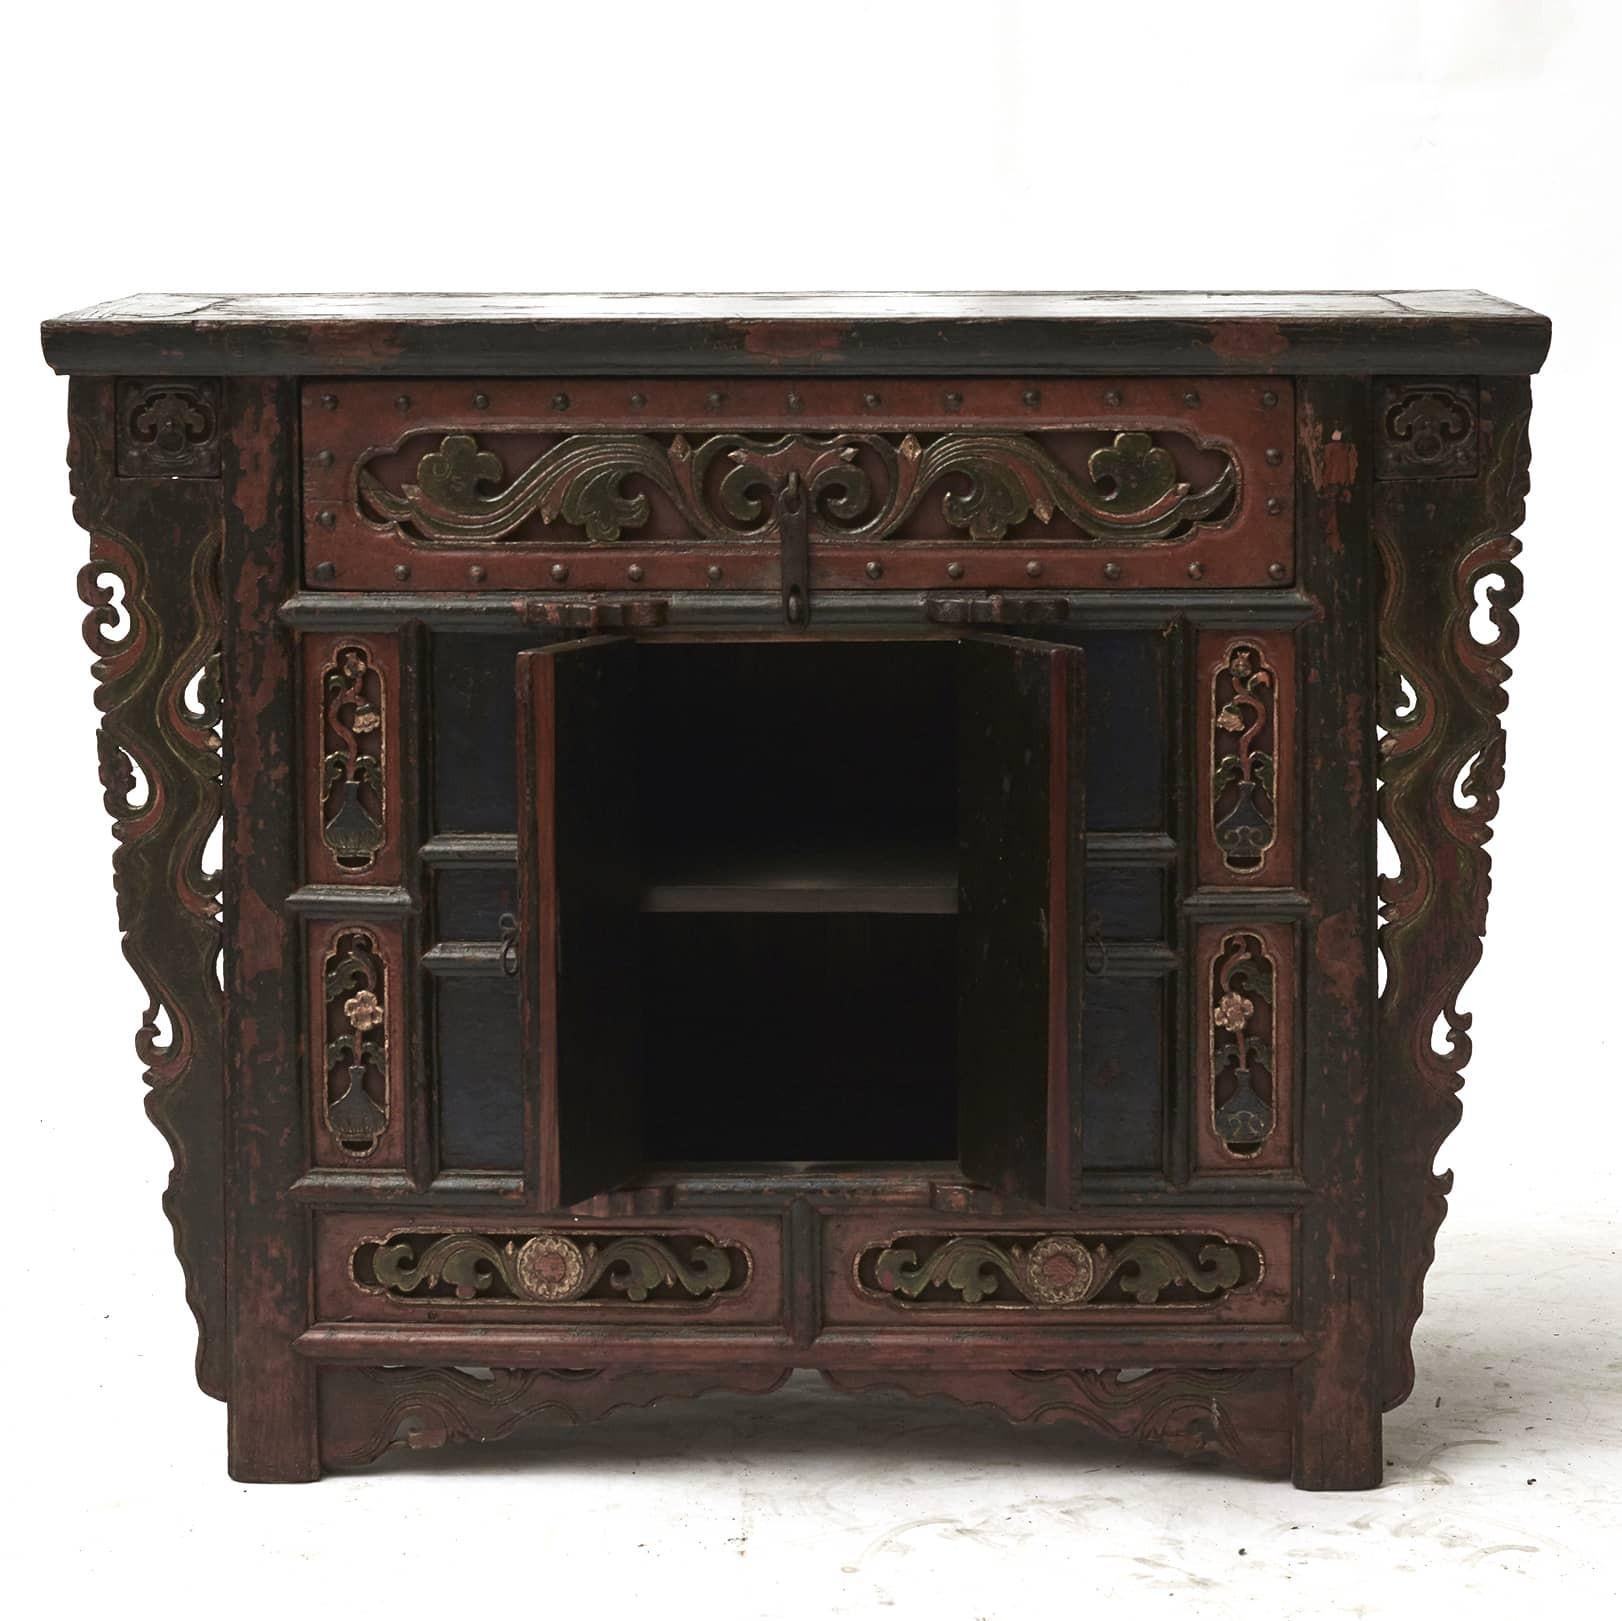 18th Century sideboard or side cabinet.
Decorated with fine ornate relief carvings on front and drawer and carved spandrels at each side that taper down to the feet.
Original polychrome lacquer. 
The sideboard is untouched in original condition,